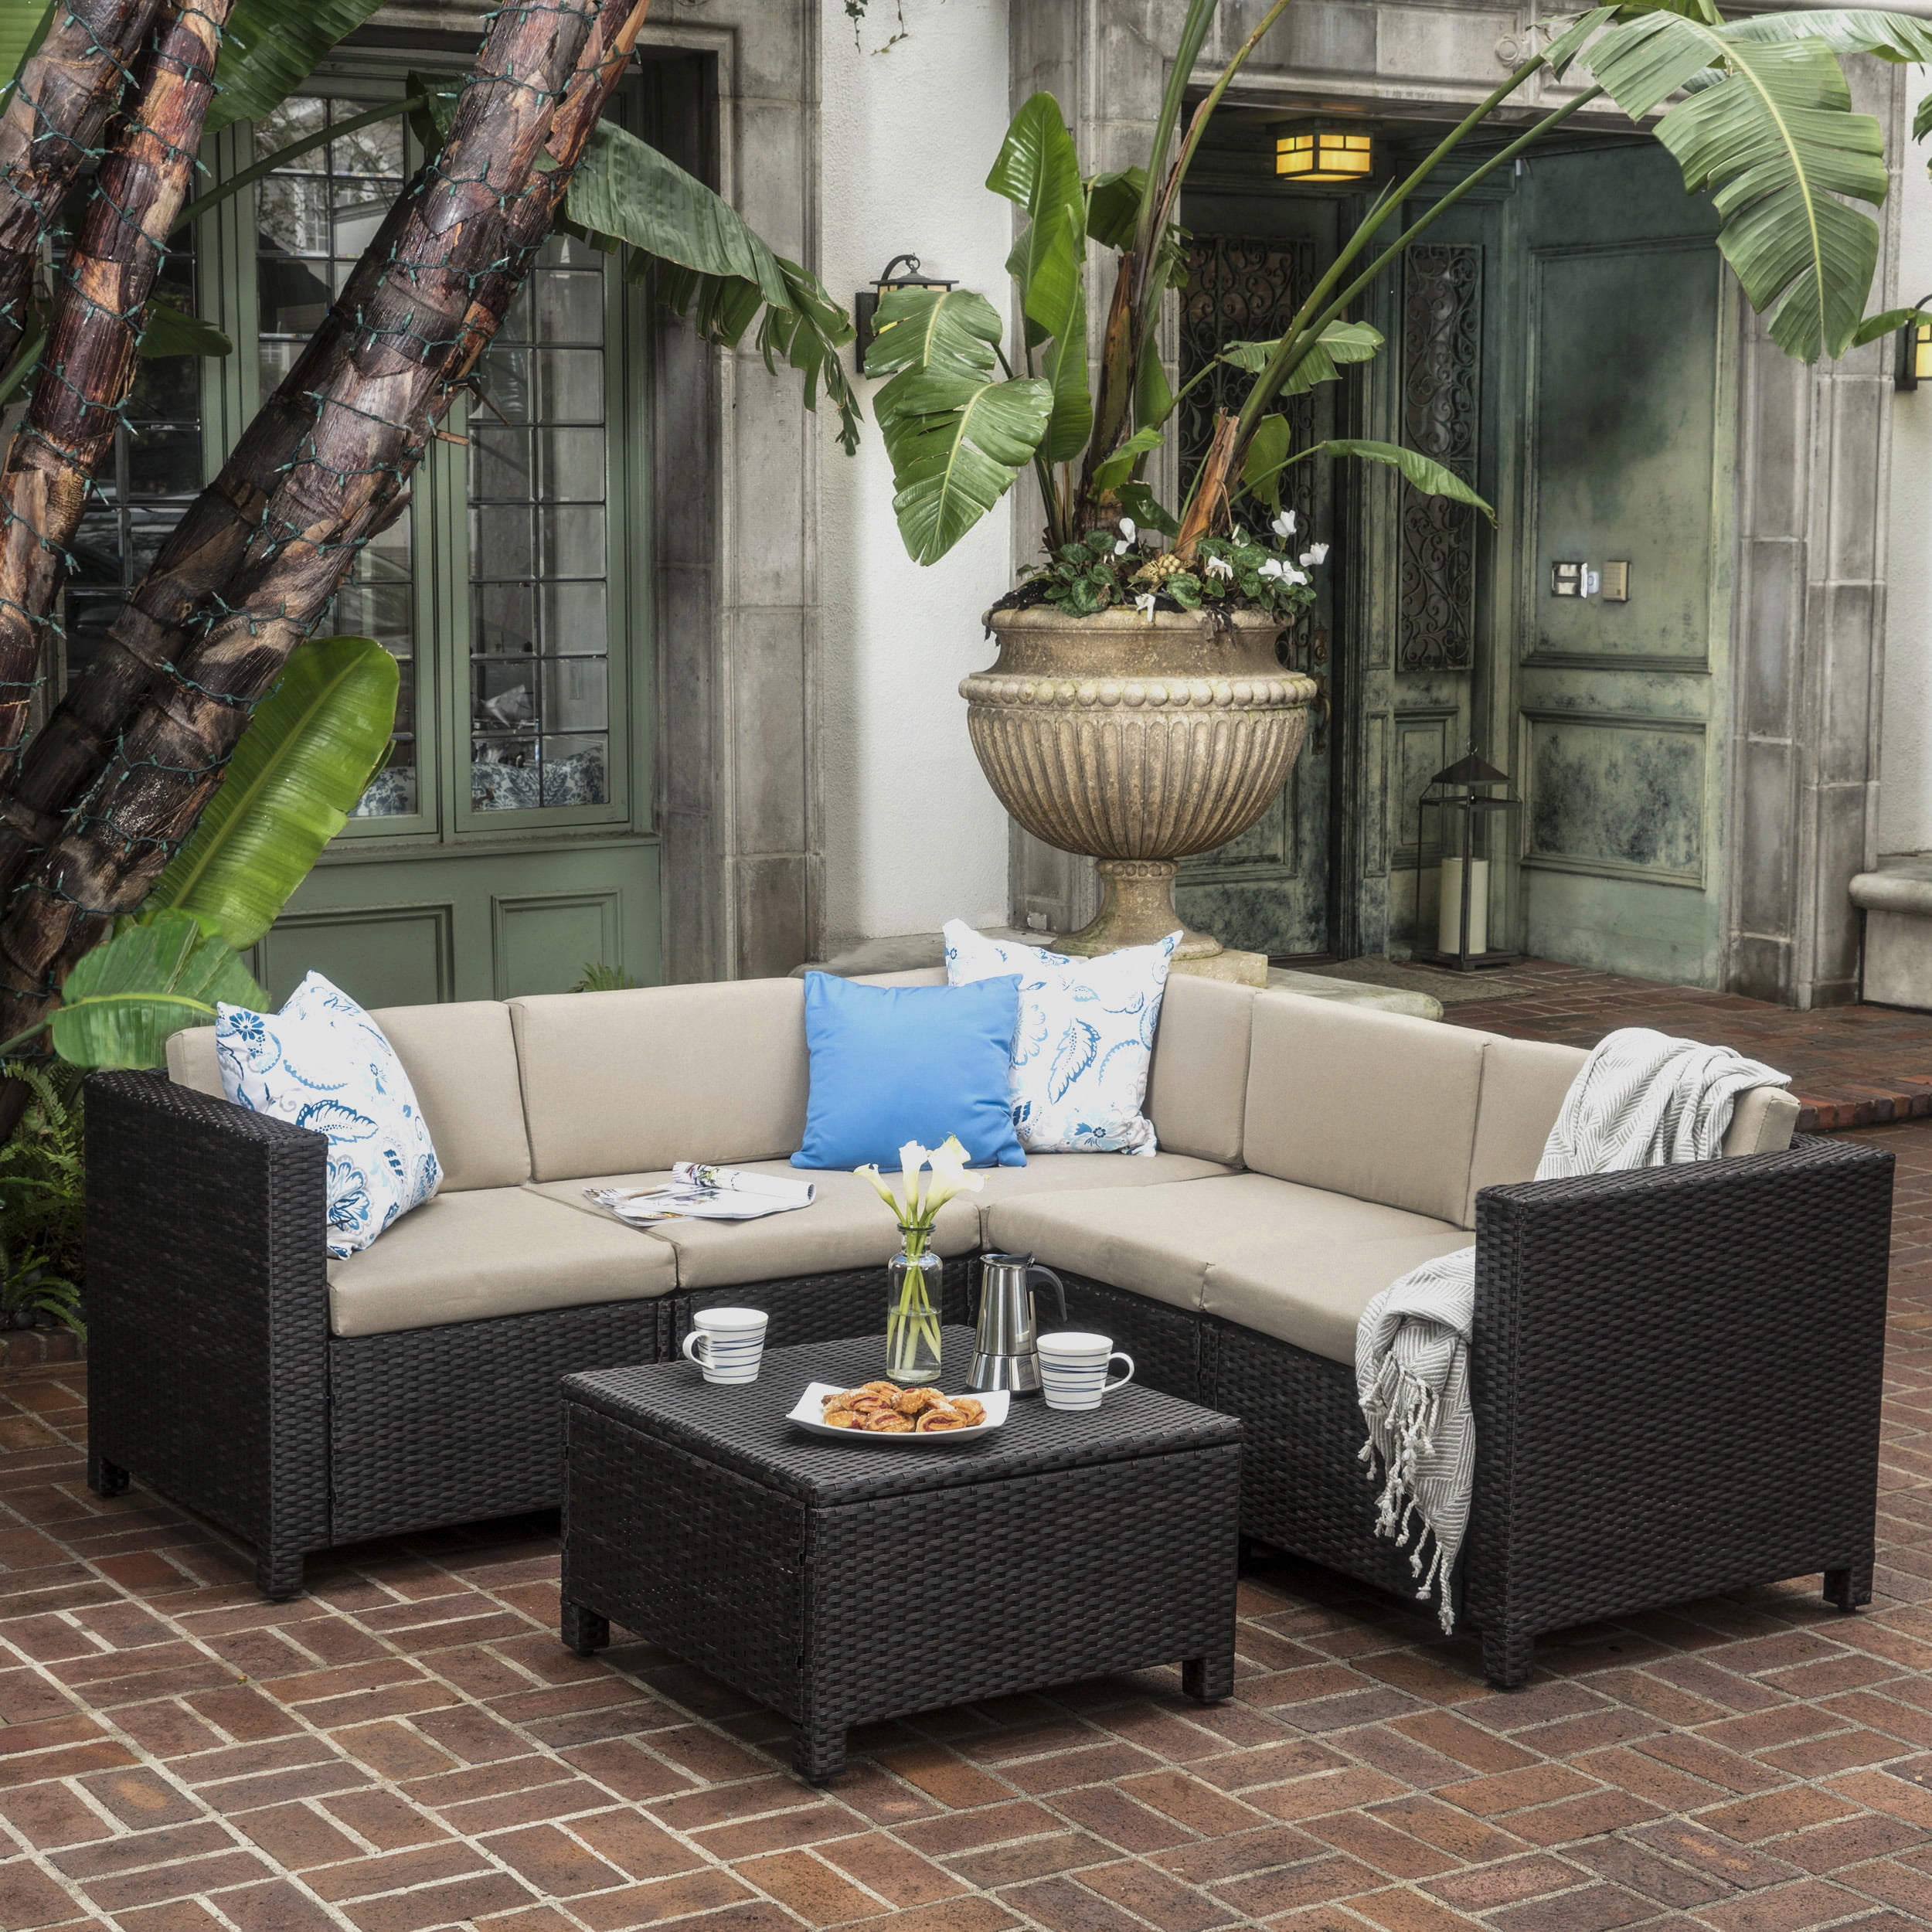 Cascada Outdoor Wicker VShaped Sectional Sofa Set with